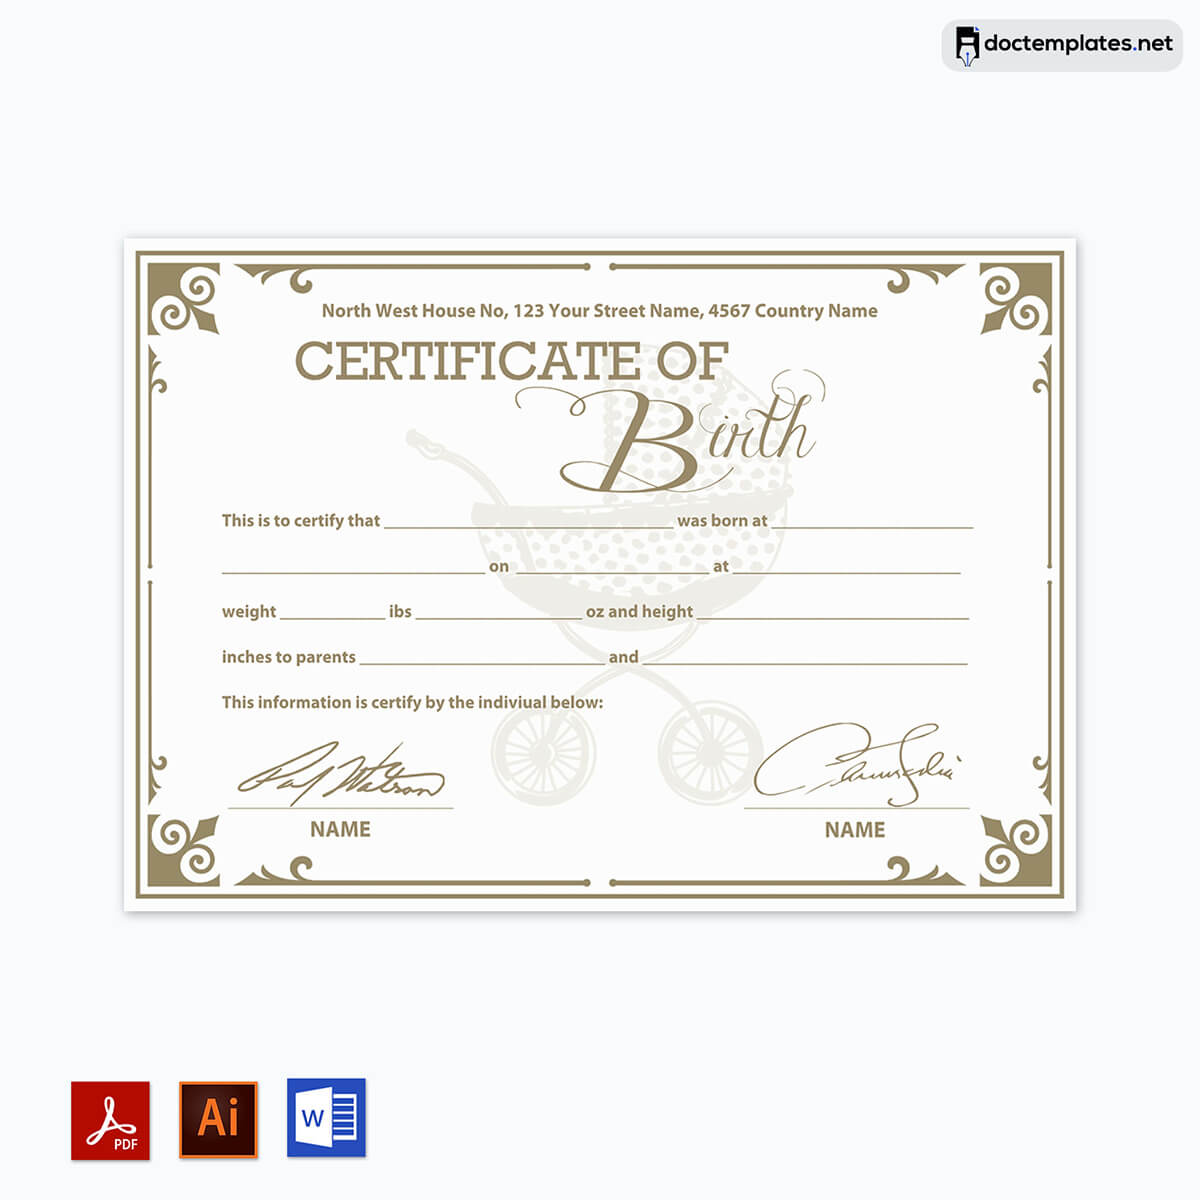 Image of Free birth certificate template
Free birth certificate template
